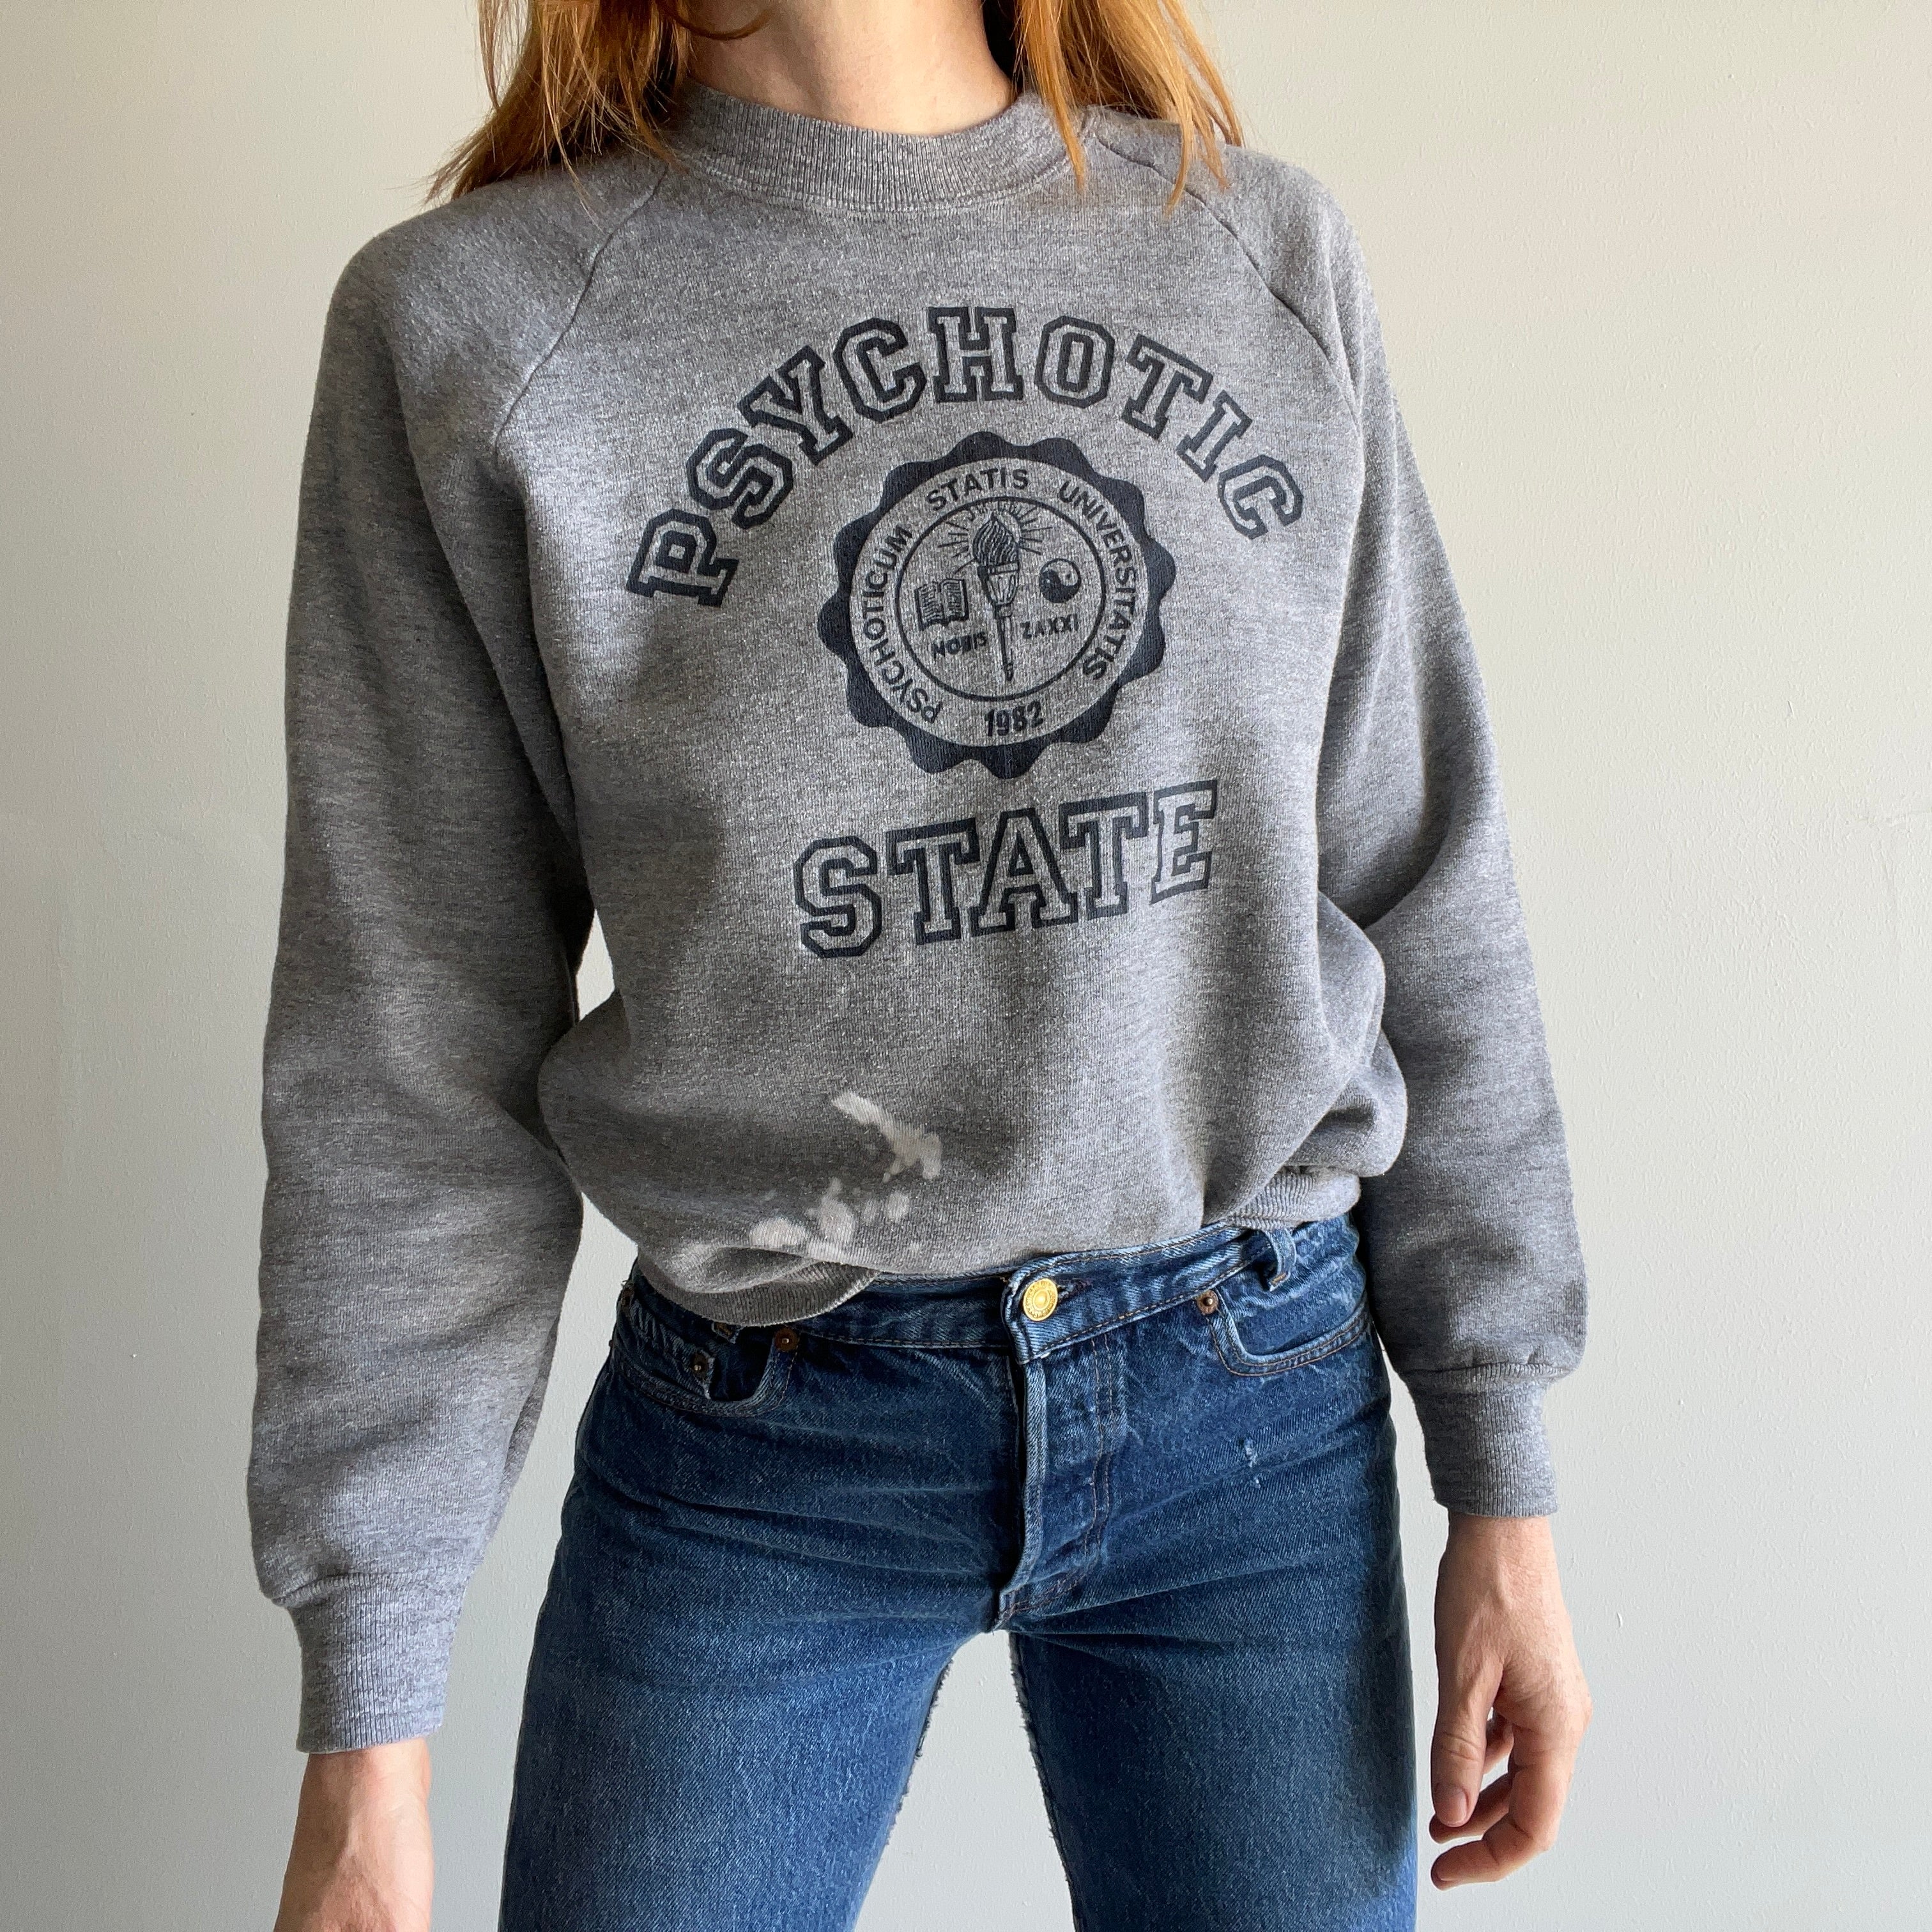 1982 Psychotic State Bleach Stained Sweatshirt